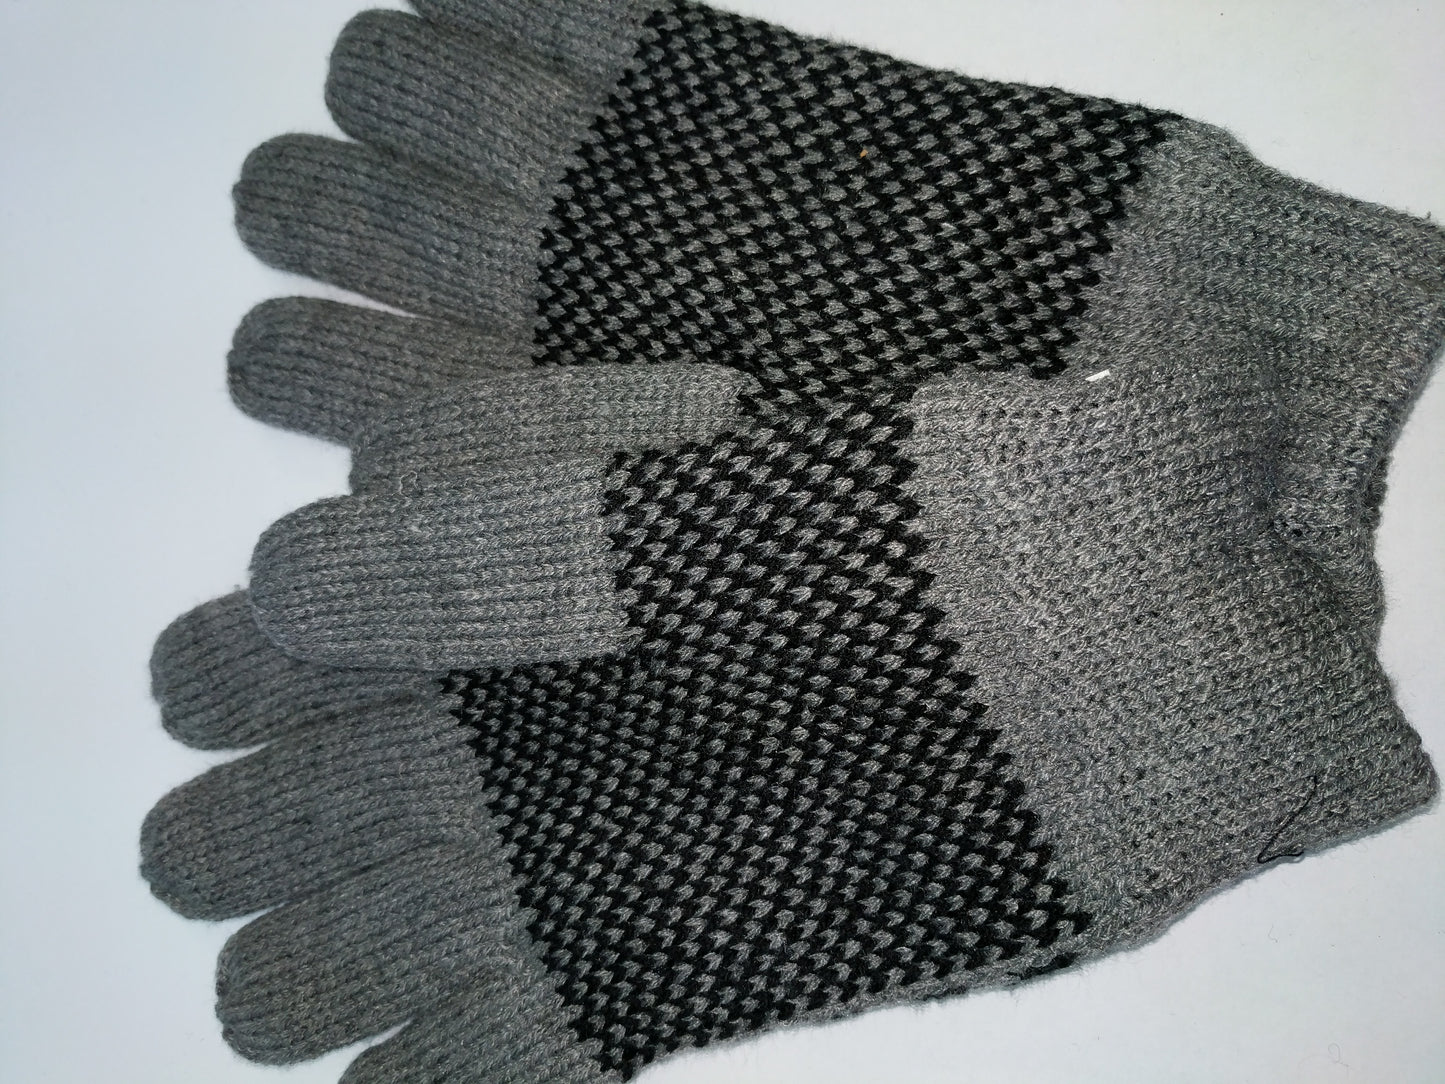 Men's Winter Thick Thinsulate Wool Gloves navy or grey options